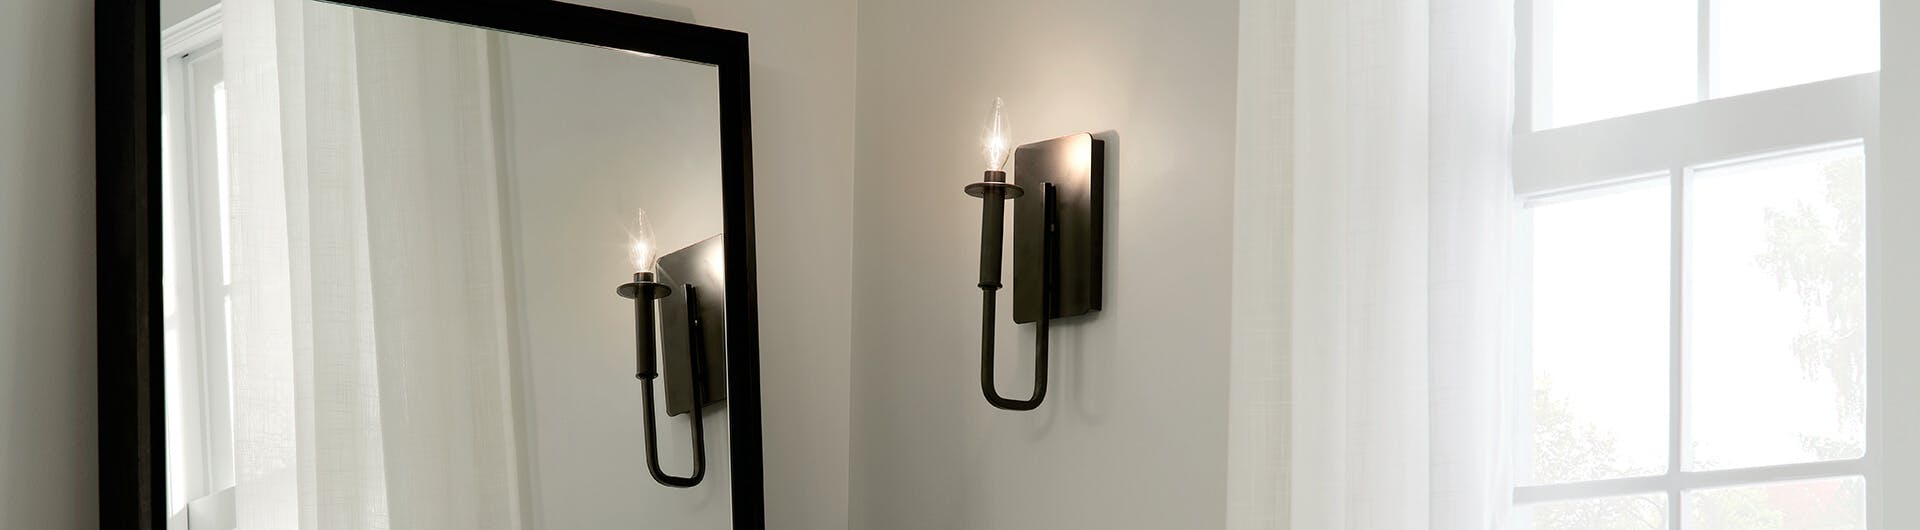 Close up of a black finish Alden wall sconce in a corner of a white room with a mirror and window next to it